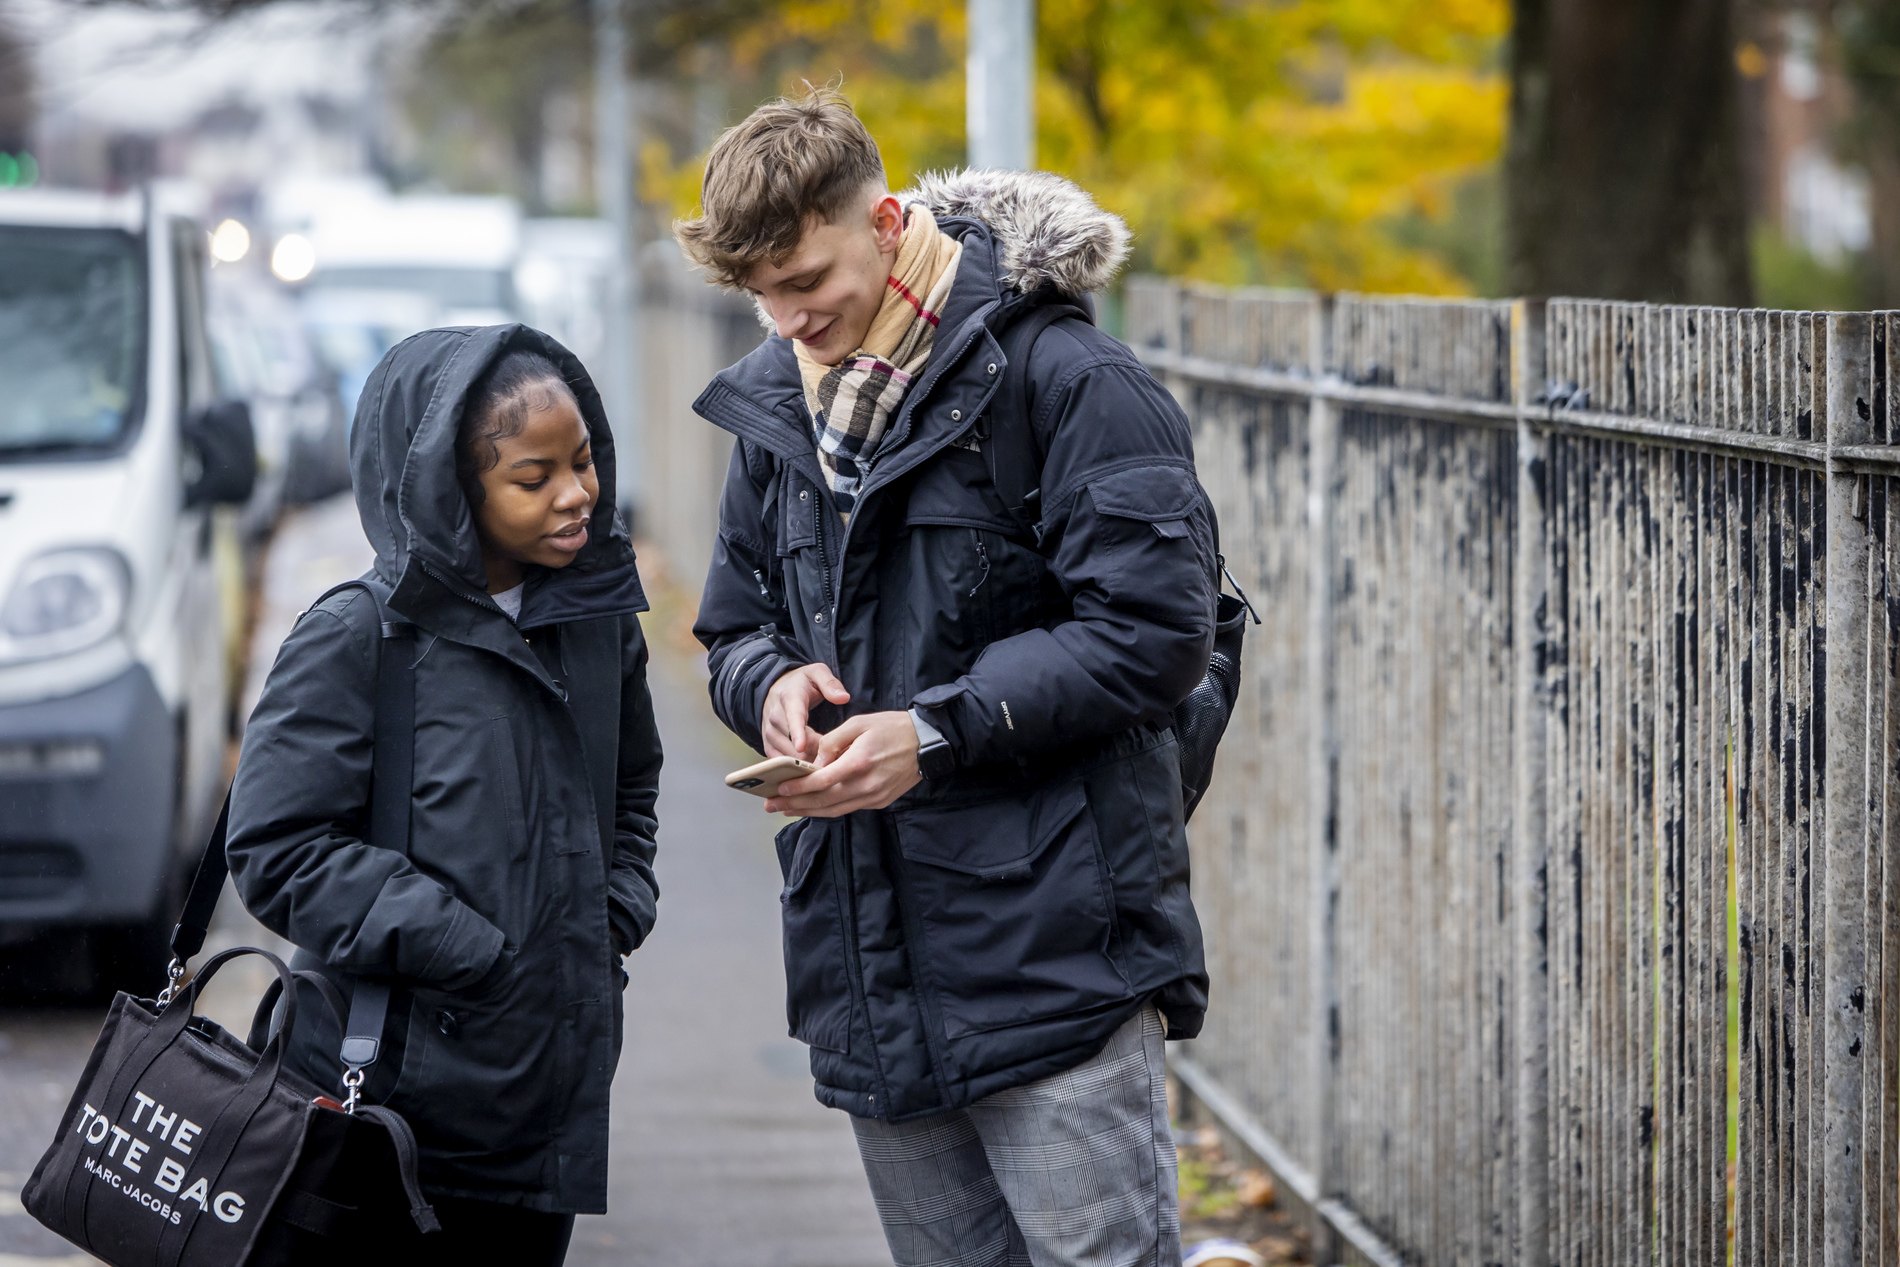 Two young people are standing on the street looking at a phone, talking about stop and search rights.